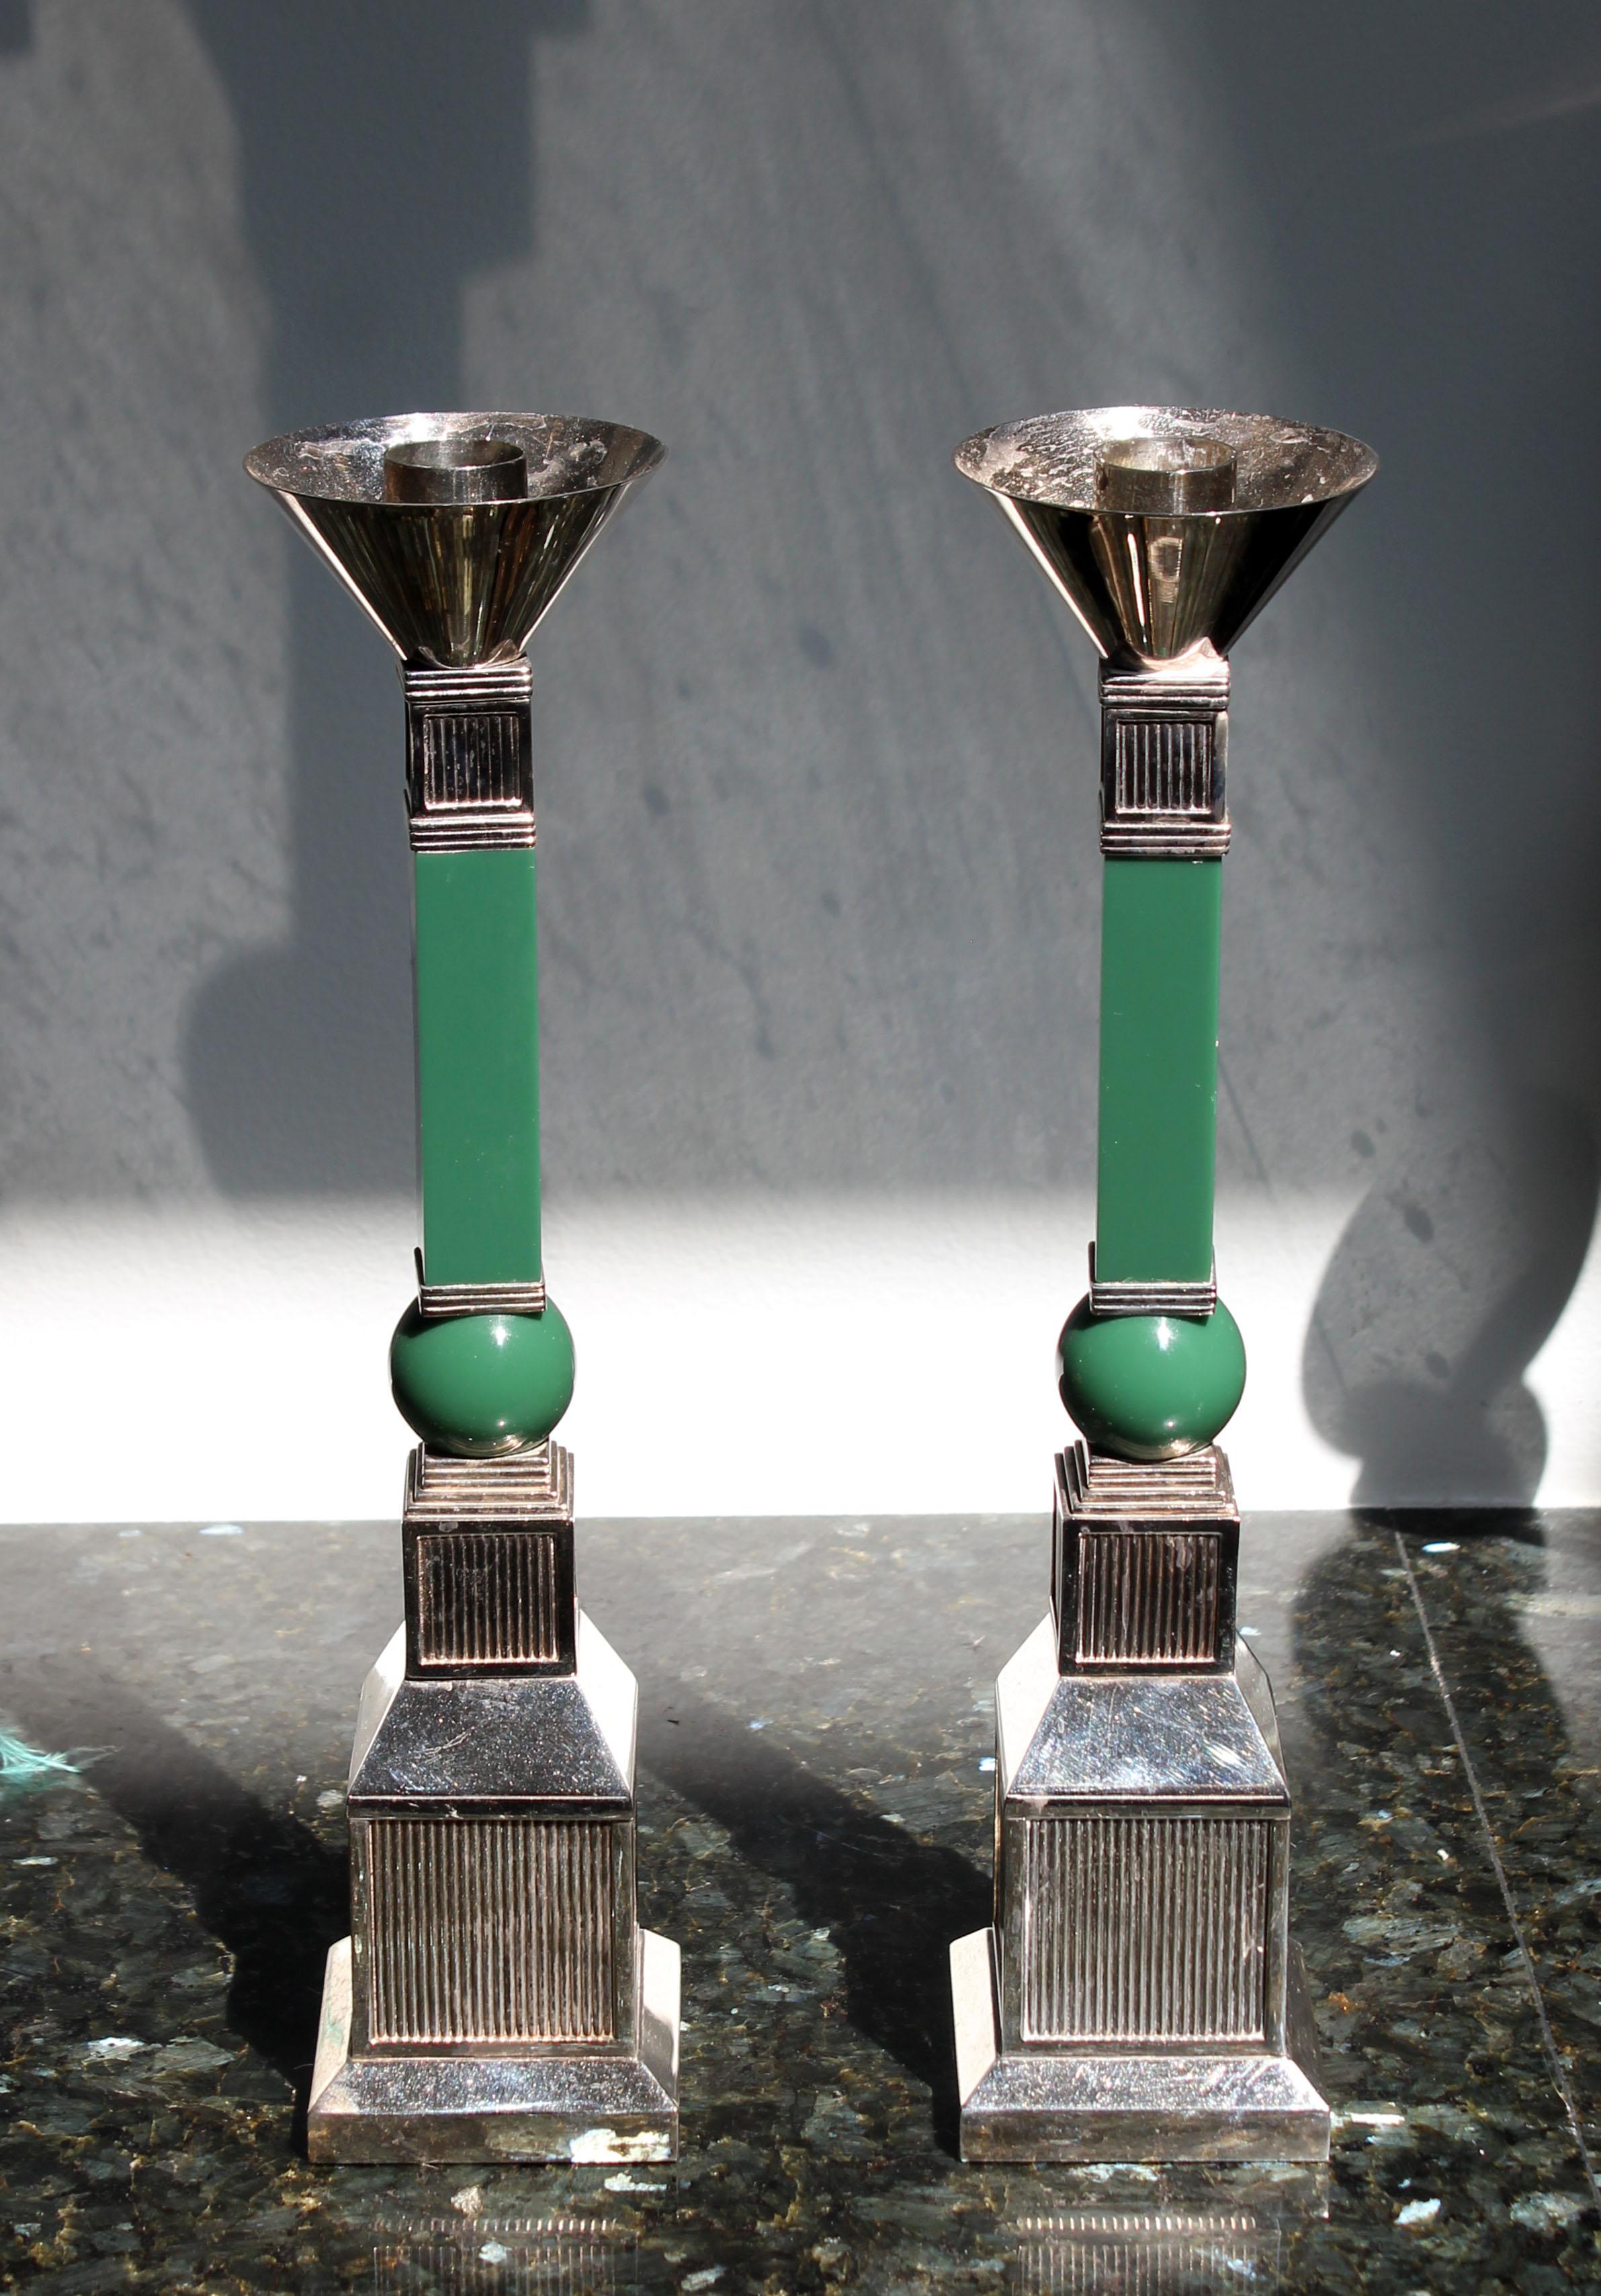 For your consideration is an incredible pair of candle sticks, made of silver plate and green resin, by Gucci, made in France, circa the 1970s. In excellent condition. The dimensions are 3